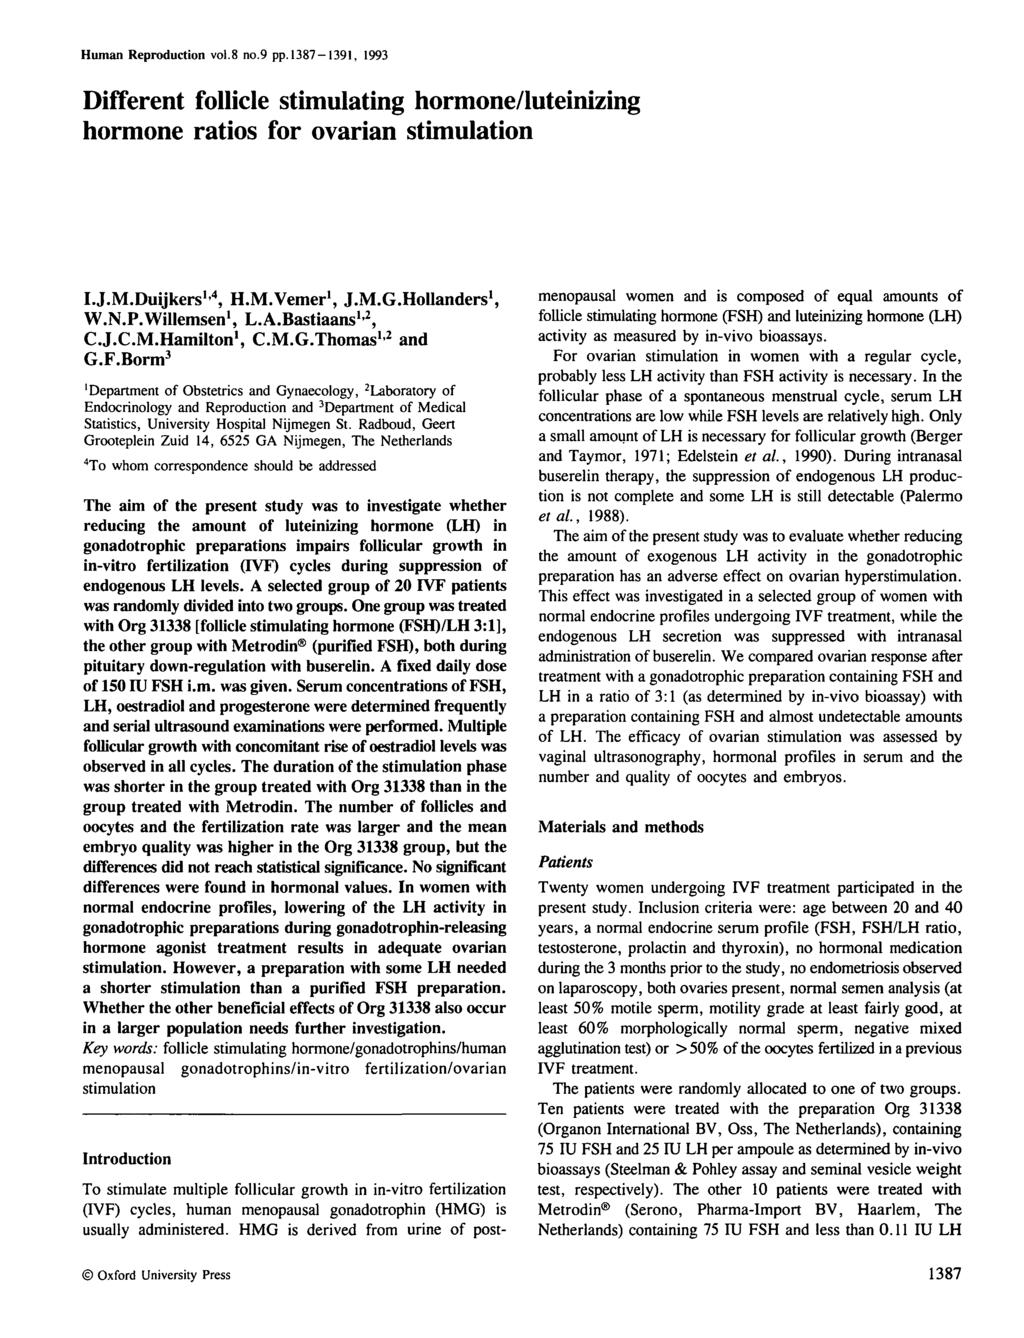 Human Reproduction vol.8 no.9 pp. 1387-1391, 1993 Different follicle stimulating hormone/luteinizing hormone ratios for ovarian stimulation LJ.M.Duijkers 1 ' 4, H.M.Vemer 1, J.M.G.HoUanders 1, W.N.P.